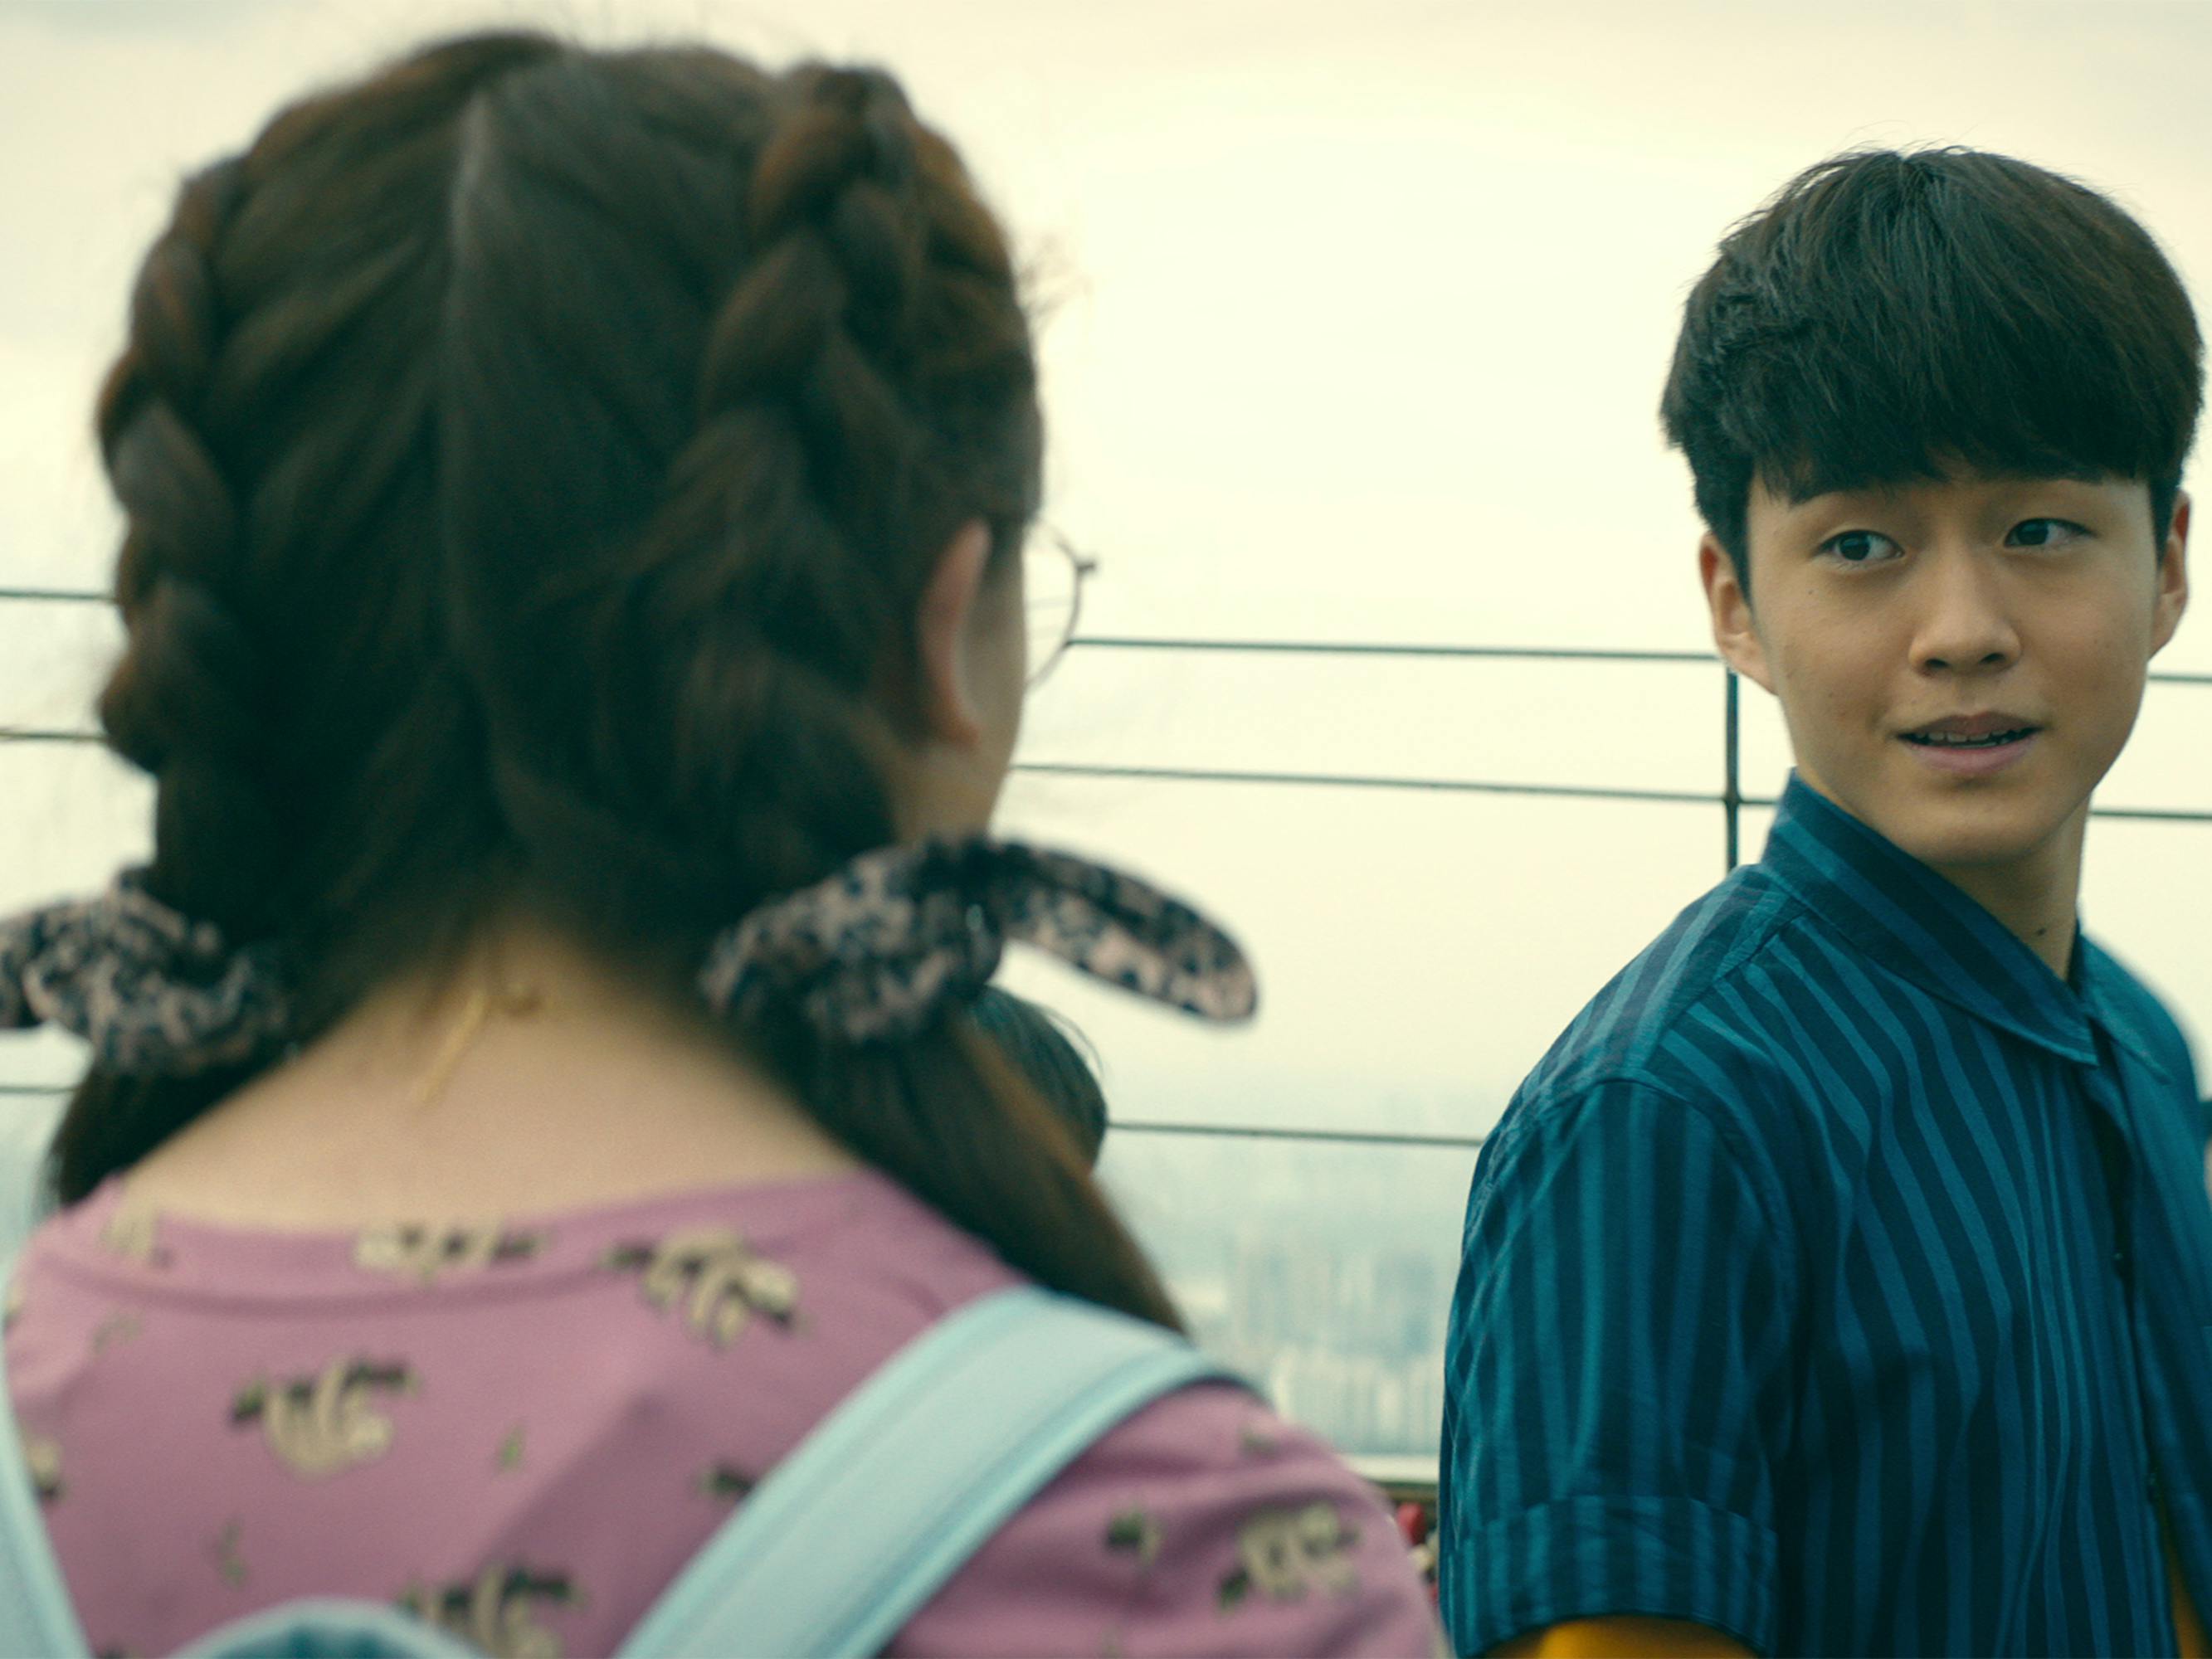 Kitty (Anna Cathcart) has her back to the camera as she looks at Dae (Jeon Ho-young), who wears a navy shirt.